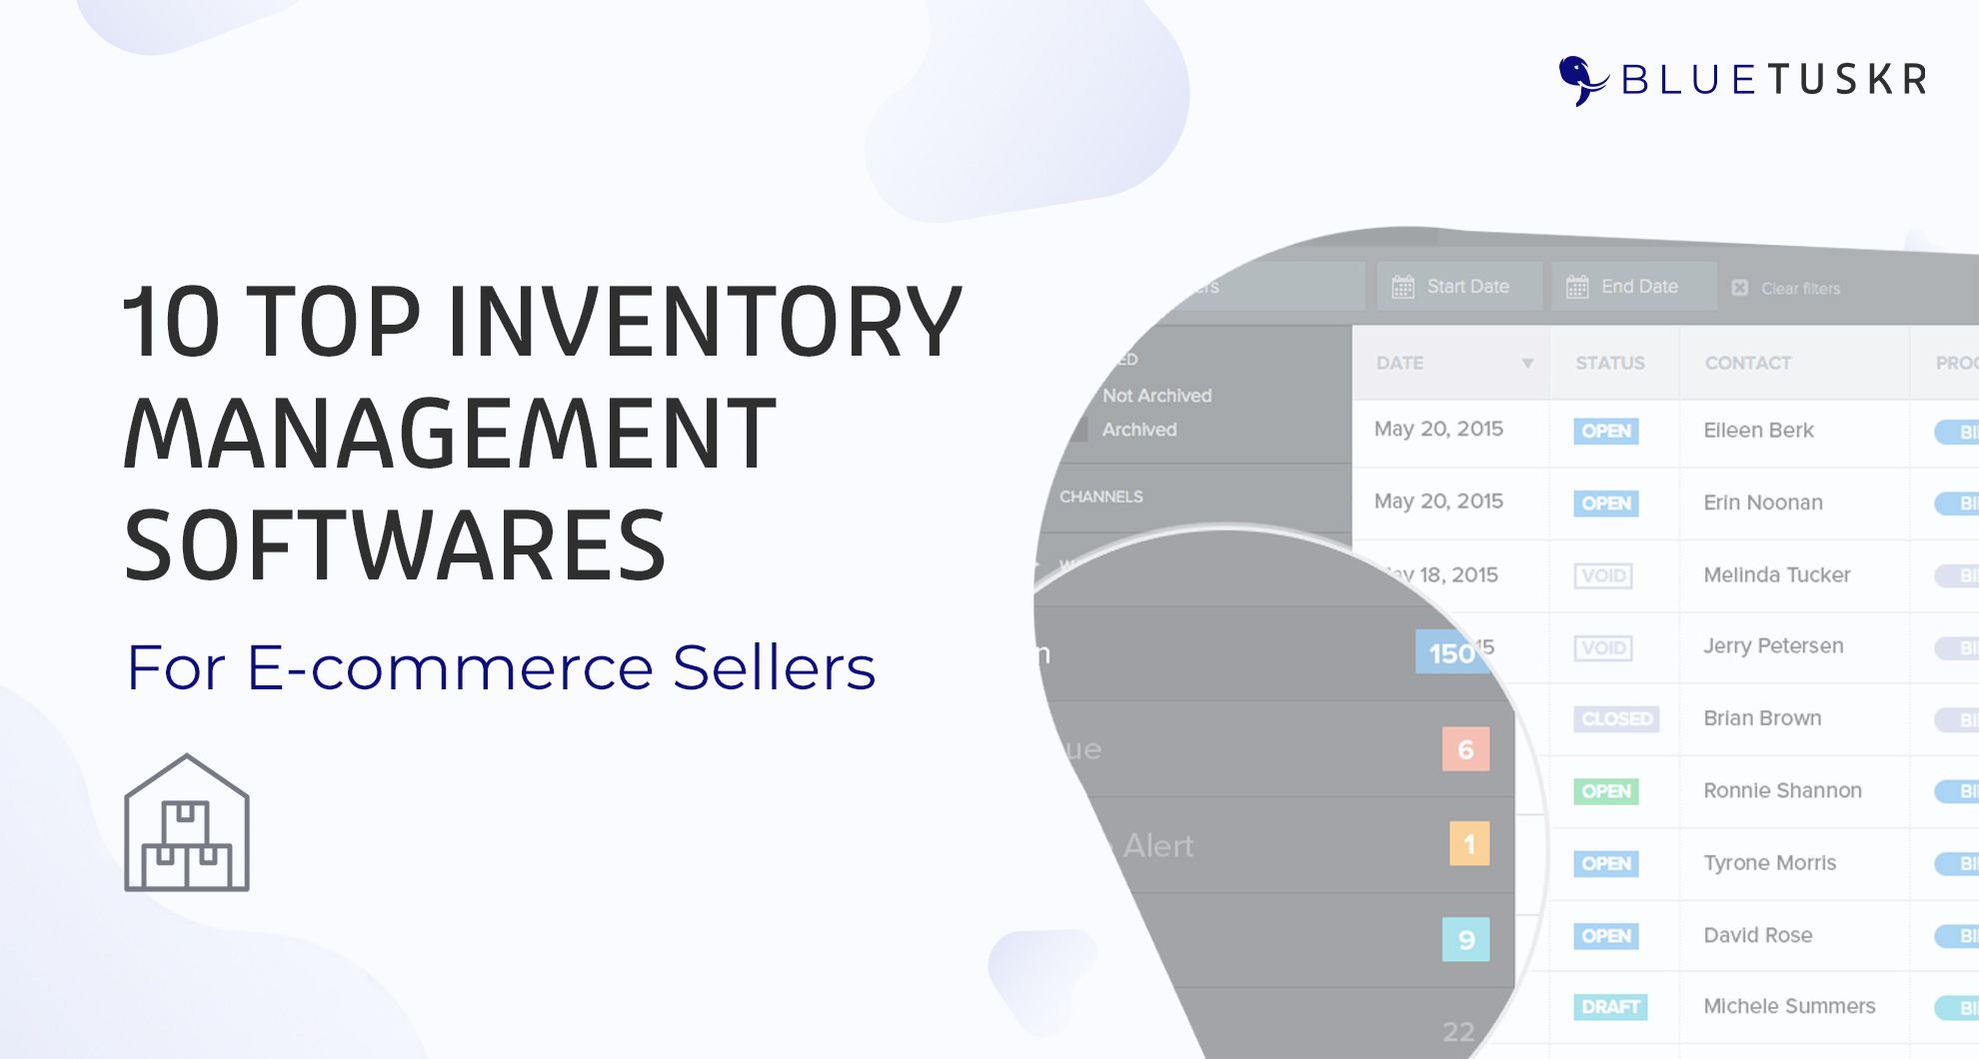 10 Top Inventory Management Softwares for E-commerce Sellers (Updated 2020)